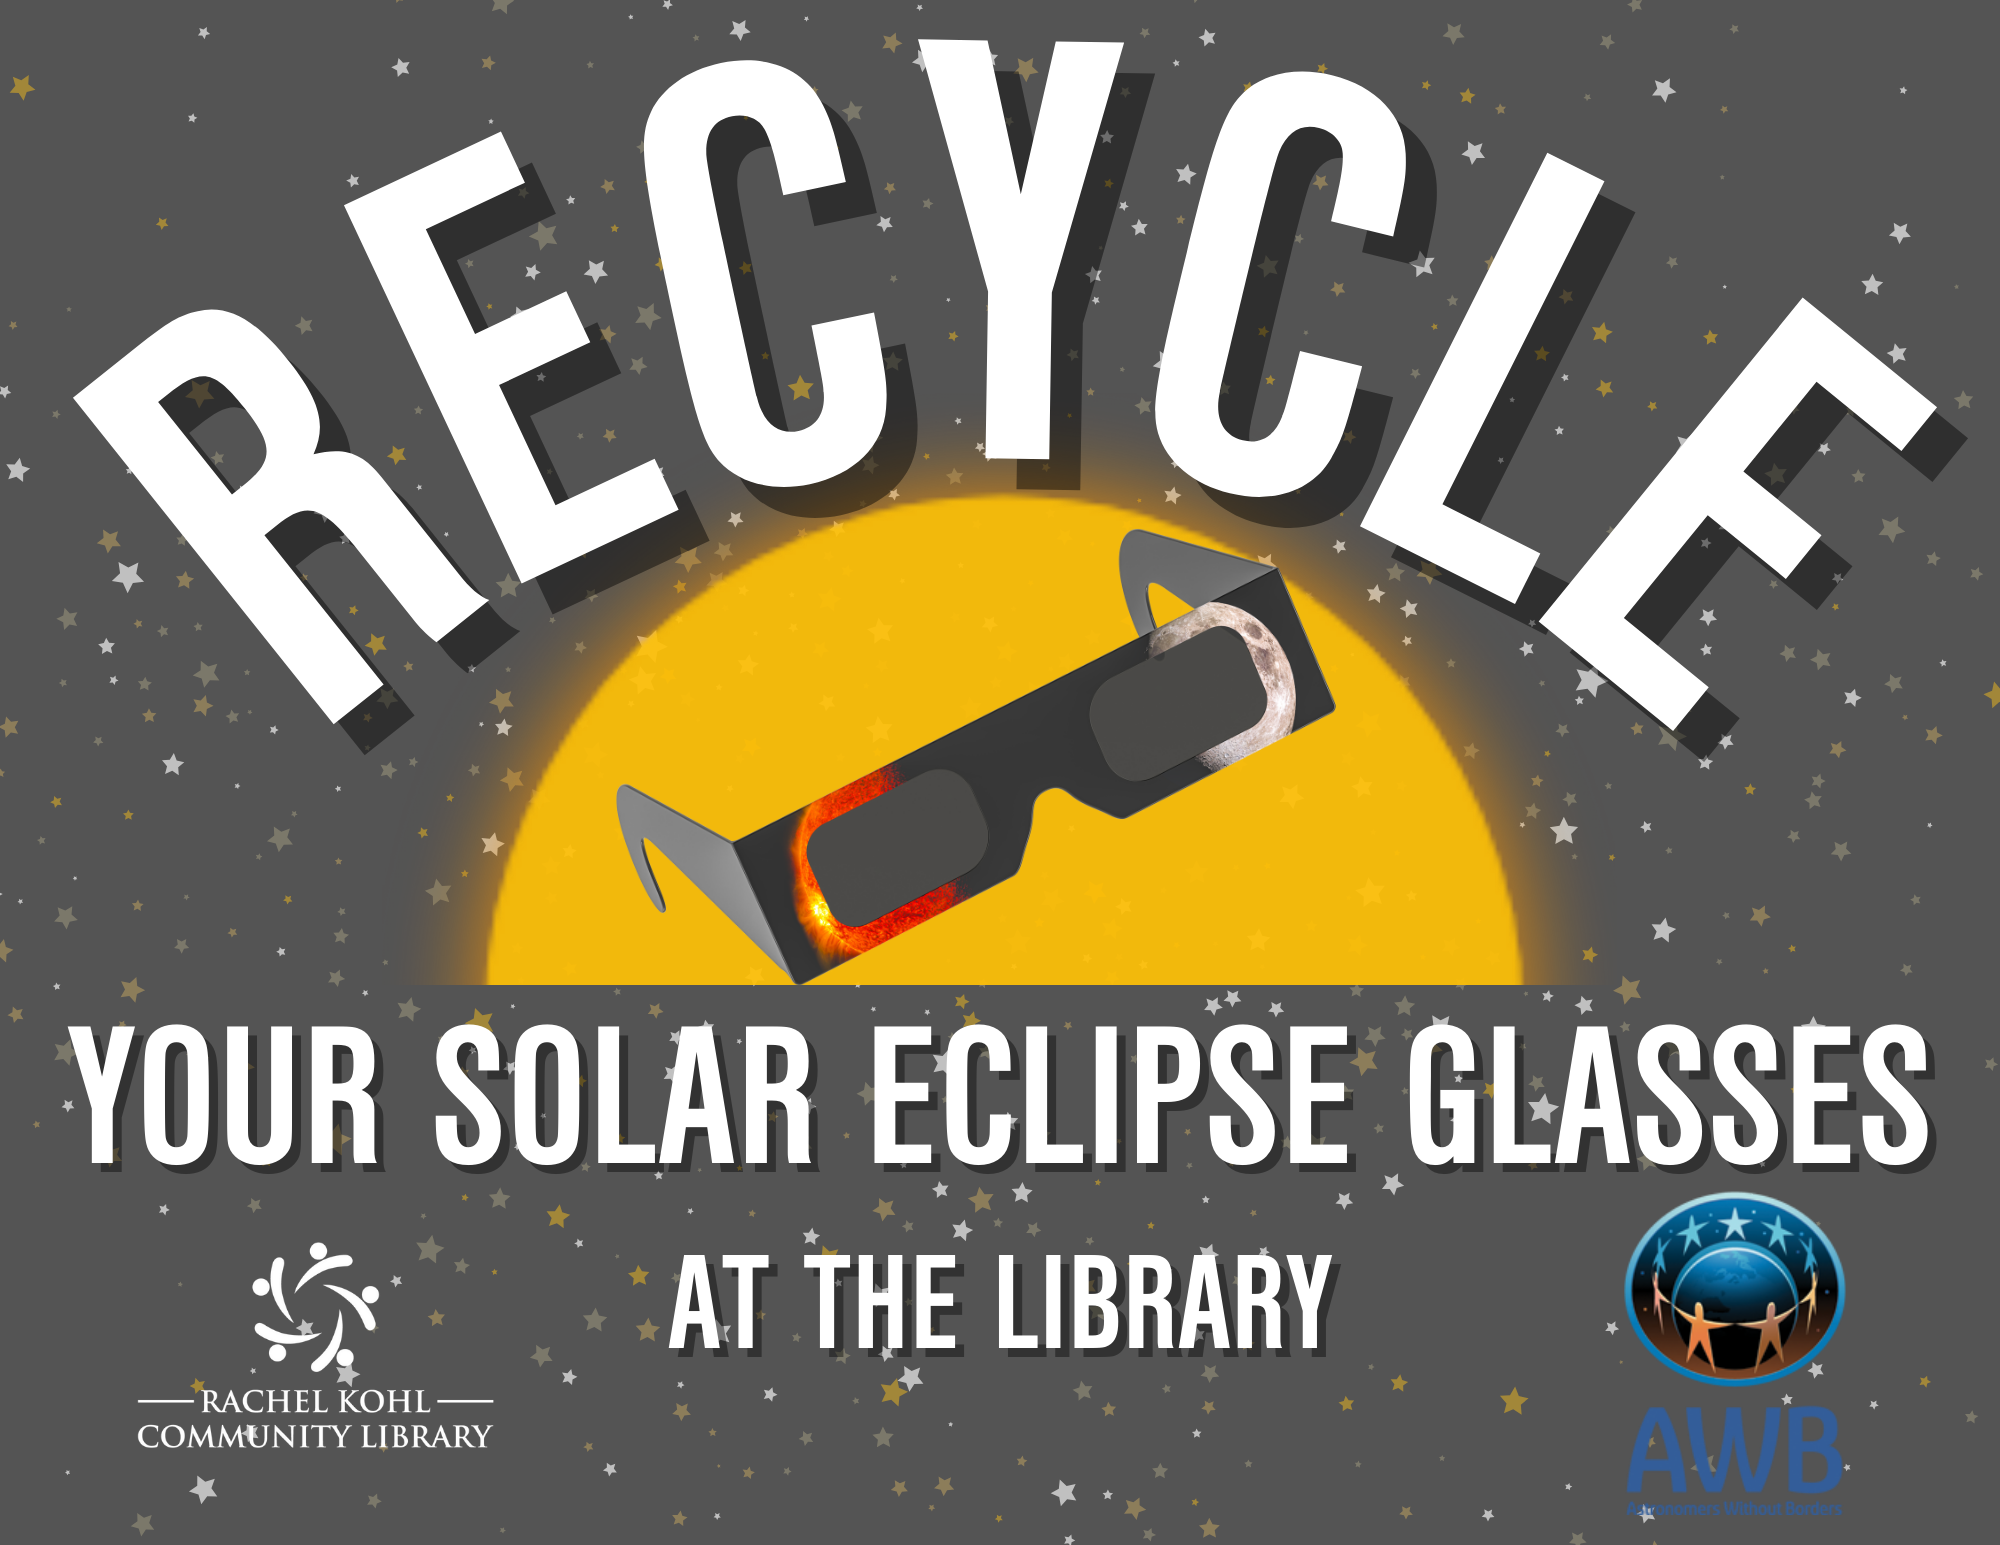 Recycle your solar eclipse glasses at the library